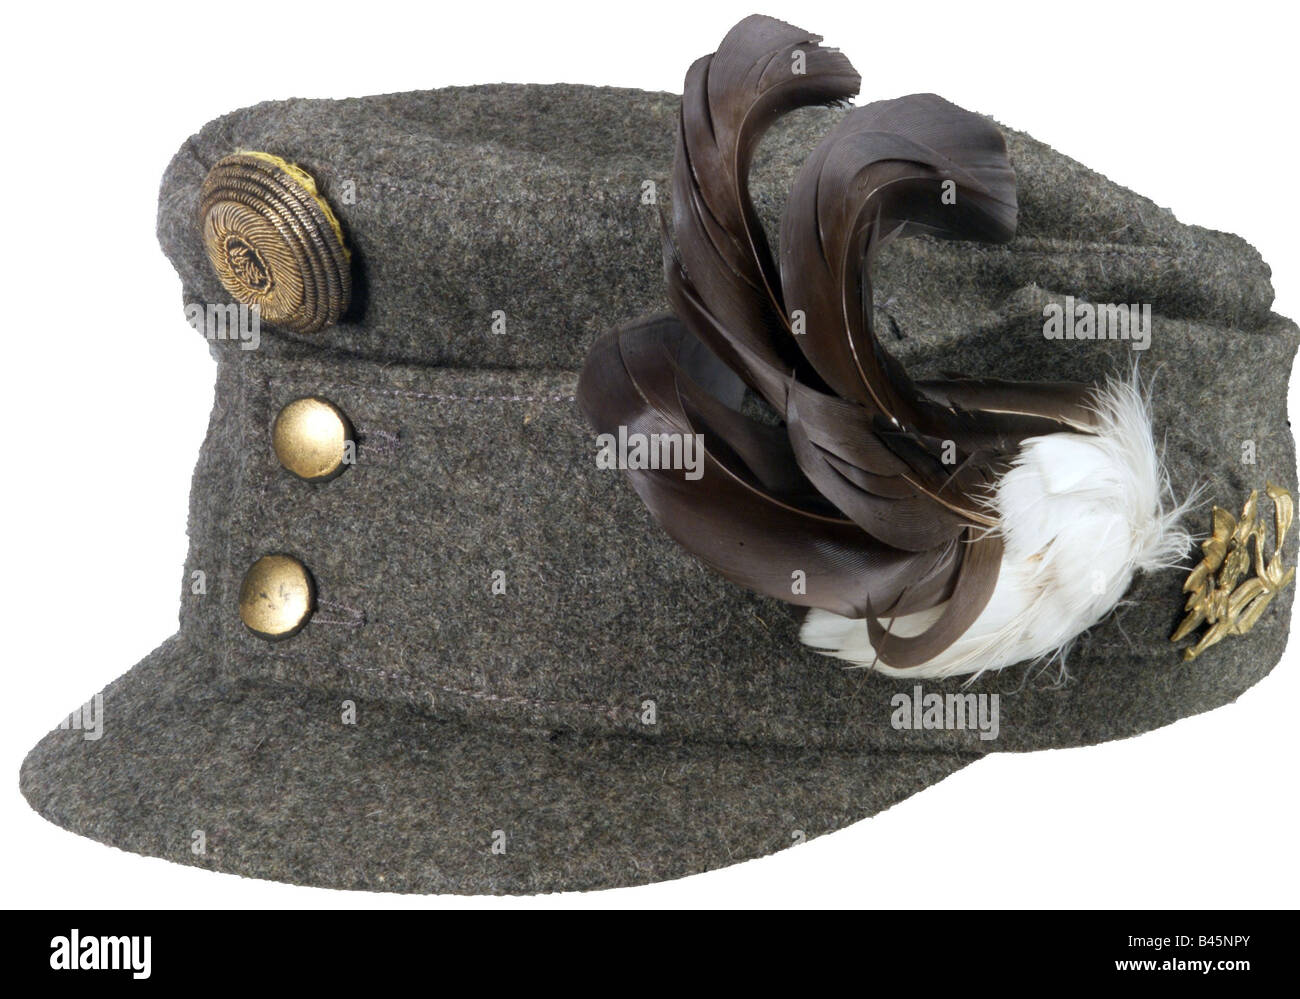 military, uniforms, Austria-Hungary, peaked cap for officers, Tyrolian Rifles, circa 1910, Austria Hungary, mountain troops, feathers, 20th century, , Stock Photo